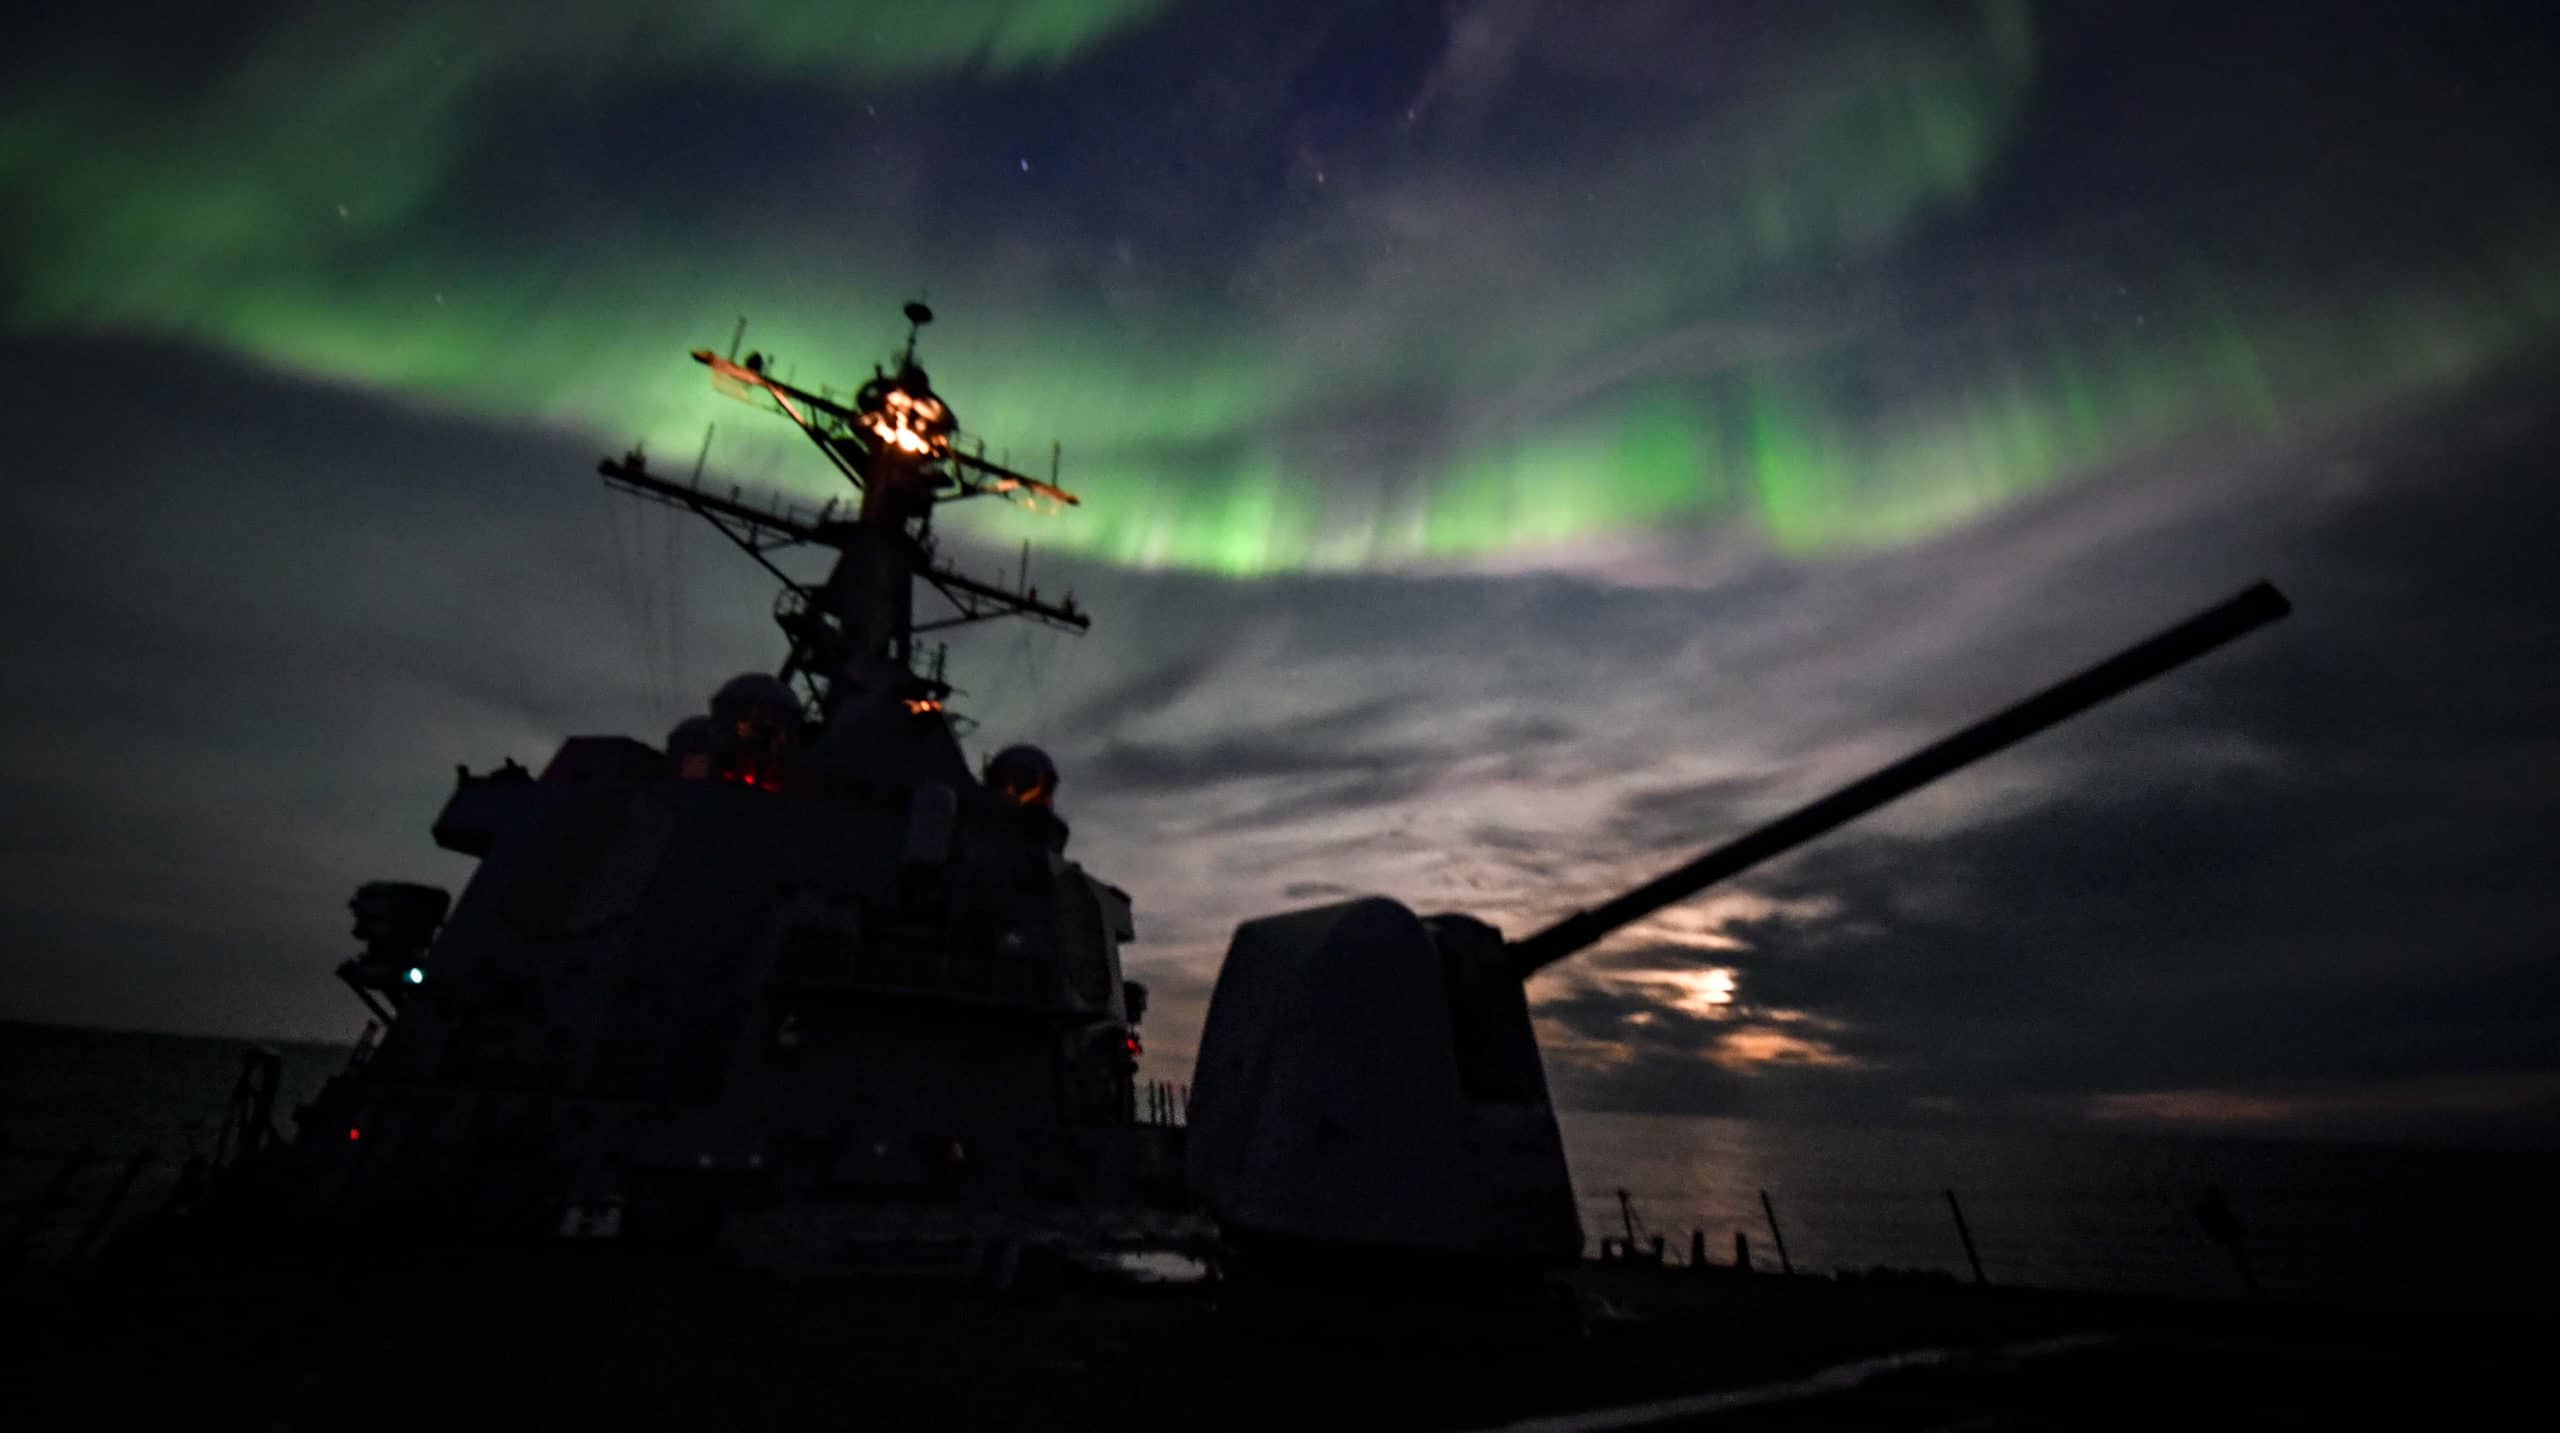 A black silhouette of a military ship against a backdrop of green northern lights in the sky